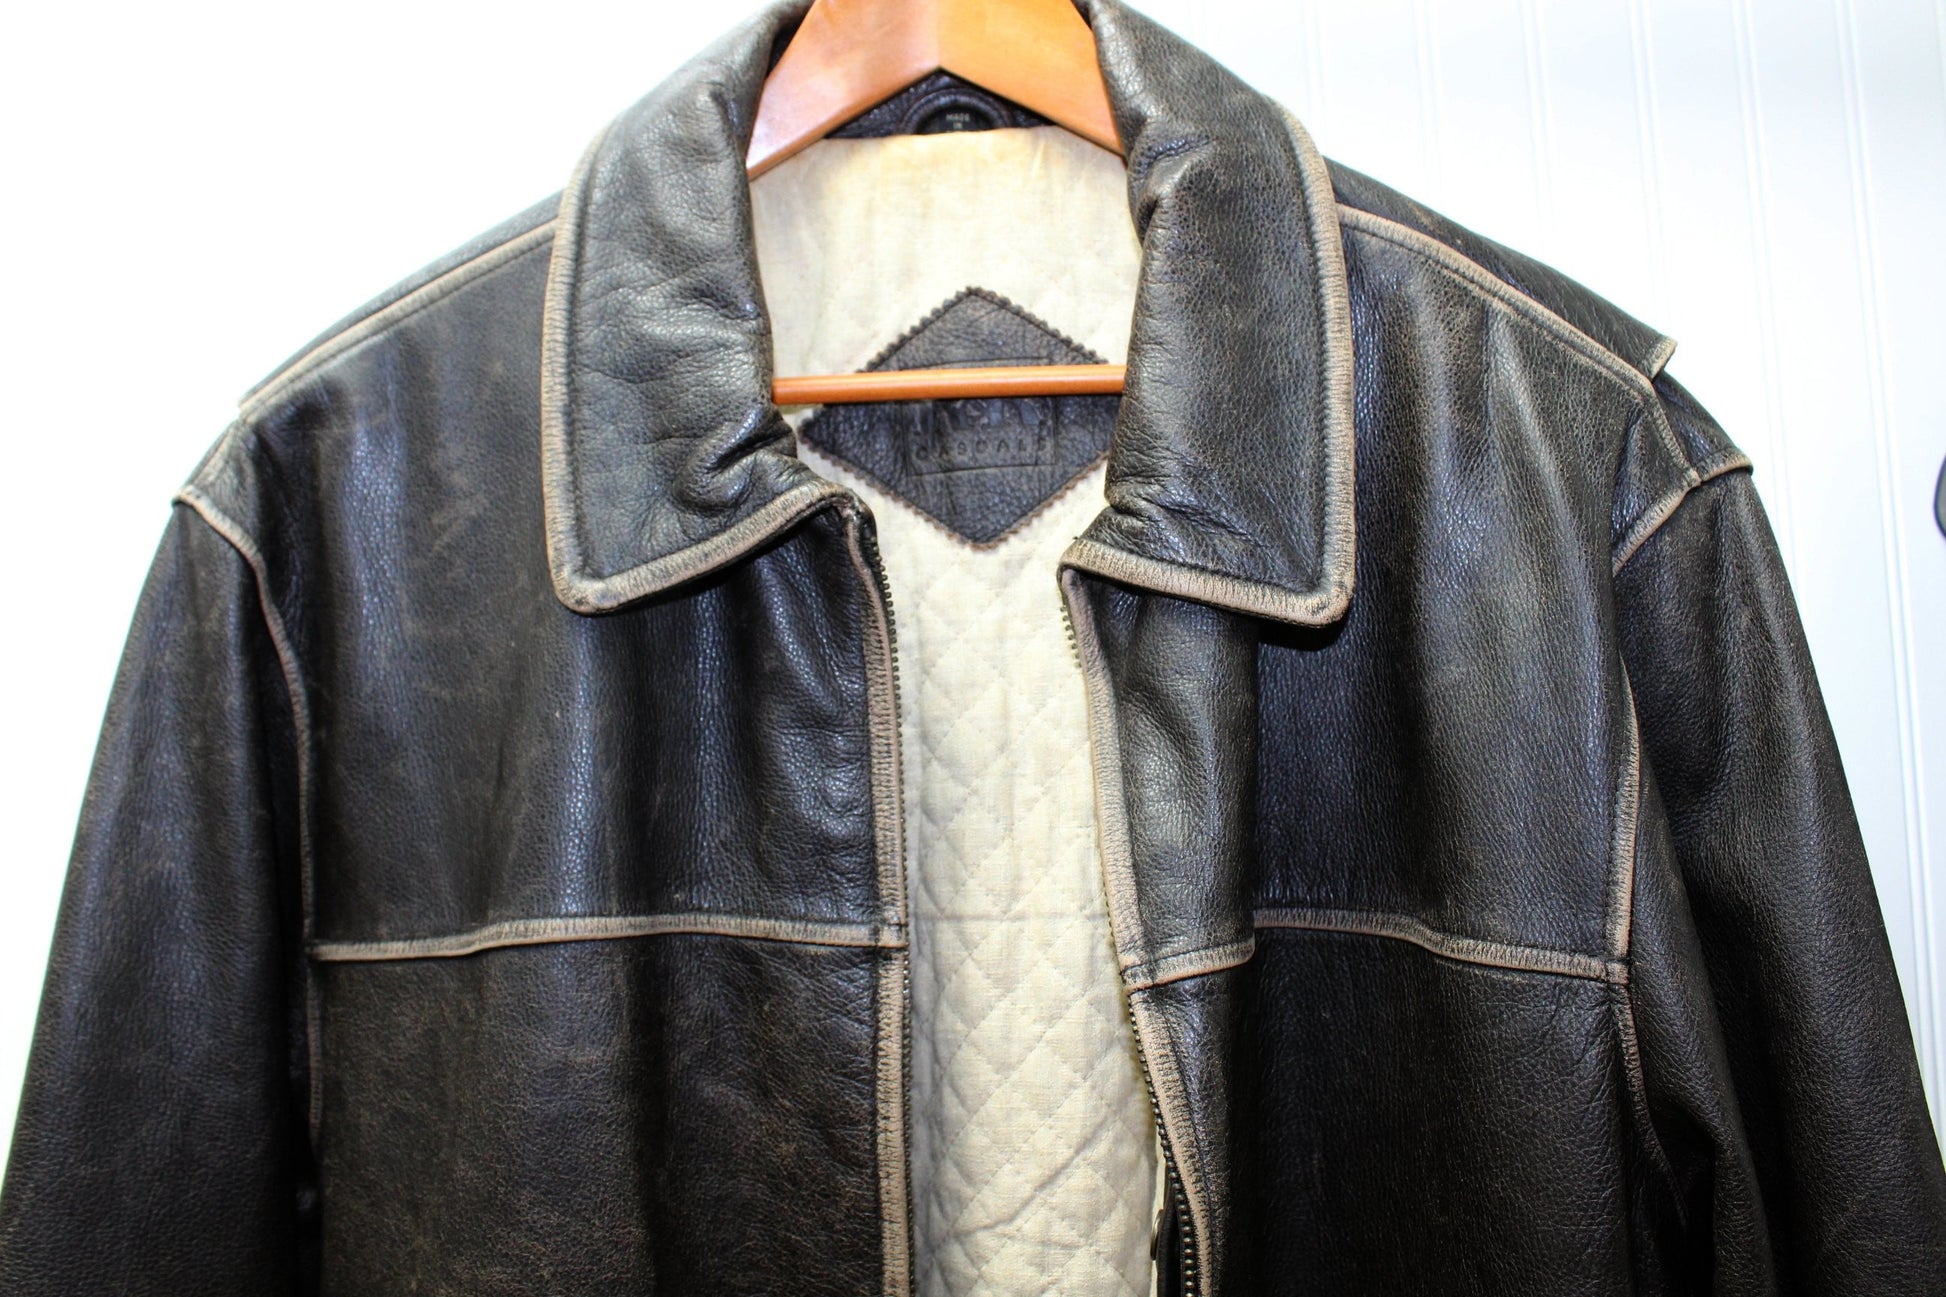 R & R Casuals Rare Distressed Leather Brown Aviator Bomber Jacket L arge Vintage linen cotton lining